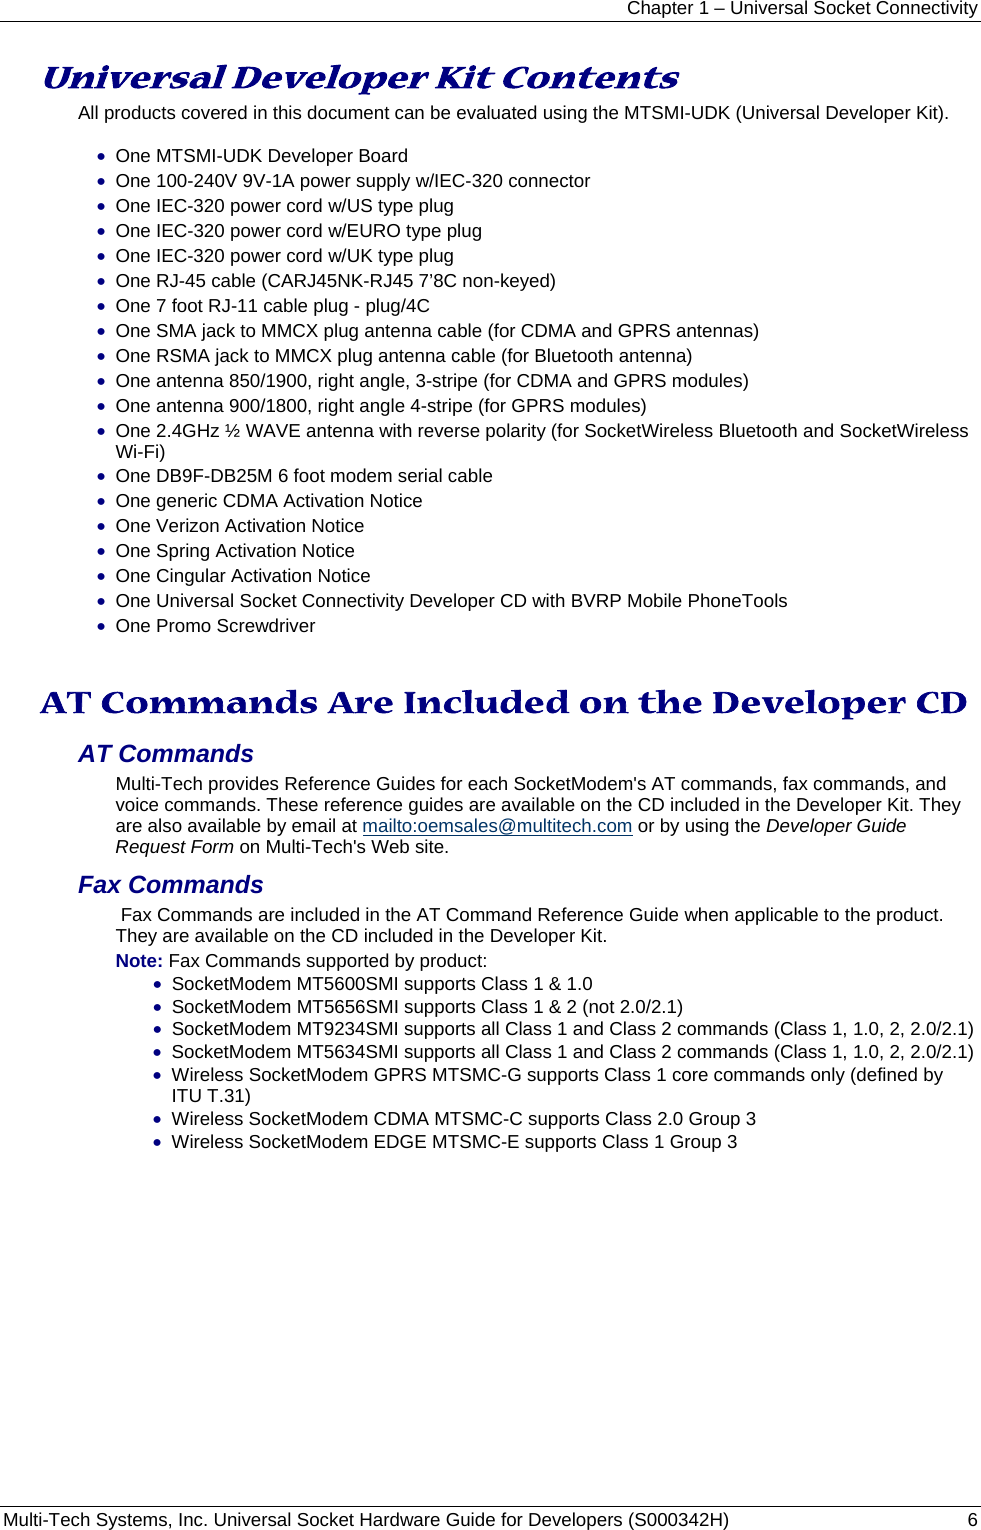 Chapter 1 – Universal Socket Connectivity Multi-Tech Systems, Inc. Universal Socket Hardware Guide for Developers (S000342H)  6  Universal Developer Kit Contents All products covered in this document can be evaluated using the MTSMI-UDK (Universal Developer Kit).  • One MTSMI-UDK Developer Board • One 100-240V 9V-1A power supply w/IEC-320 connector • One IEC-320 power cord w/US type plug • One IEC-320 power cord w/EURO type plug • One IEC-320 power cord w/UK type plug • One RJ-45 cable (CARJ45NK-RJ45 7’8C non-keyed) • One 7 foot RJ-11 cable plug - plug/4C • One SMA jack to MMCX plug antenna cable (for CDMA and GPRS antennas) • One RSMA jack to MMCX plug antenna cable (for Bluetooth antenna) • One antenna 850/1900, right angle, 3-stripe (for CDMA and GPRS modules) • One antenna 900/1800, right angle 4-stripe (for GPRS modules) • One 2.4GHz ½ WAVE antenna with reverse polarity (for SocketWireless Bluetooth and SocketWireless Wi-Fi) • One DB9F-DB25M 6 foot modem serial cable • One generic CDMA Activation Notice • One Verizon Activation Notice     • One Spring Activation Notice              • One Cingular Activation Notice • One Universal Socket Connectivity Developer CD with BVRP Mobile PhoneTools • One Promo Screwdriver     AT Commands Are Included on the Developer CD AT Commands  Multi-Tech provides Reference Guides for each SocketModem&apos;s AT commands, fax commands, and voice commands. These reference guides are available on the CD included in the Developer Kit. They are also available by email at mailto:oemsales@multitech.com or by using the Developer Guide Request Form on Multi-Tech&apos;s Web site.  Fax Commands   Fax Commands are included in the AT Command Reference Guide when applicable to the product. They are available on the CD included in the Developer Kit.   Note: Fax Commands supported by product:  • SocketModem MT5600SMI supports Class 1 &amp; 1.0  • SocketModem MT5656SMI supports Class 1 &amp; 2 (not 2.0/2.1) • SocketModem MT9234SMI supports all Class 1 and Class 2 commands (Class 1, 1.0, 2, 2.0/2.1) • SocketModem MT5634SMI supports all Class 1 and Class 2 commands (Class 1, 1.0, 2, 2.0/2.1) • Wireless SocketModem GPRS MTSMC-G supports Class 1 core commands only (defined by ITU T.31) • Wireless SocketModem CDMA MTSMC-C supports Class 2.0 Group 3 • Wireless SocketModem EDGE MTSMC-E supports Class 1 Group 3   